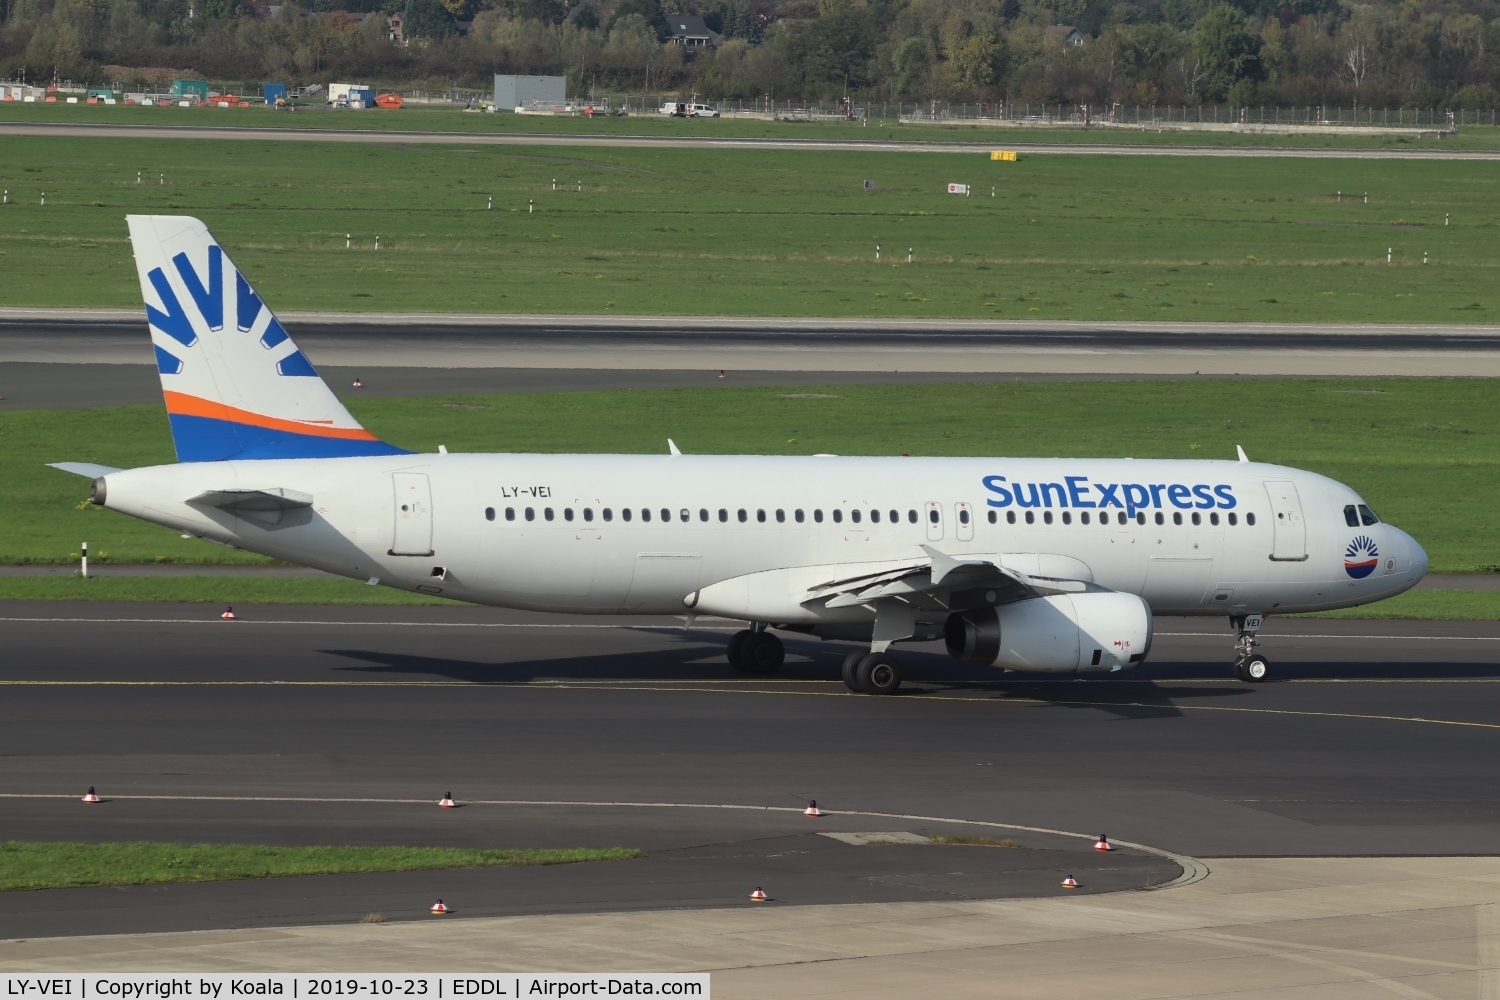 LY-VEI, 1998 Airbus A320-233 C/N 0902, Leased to SunExpress